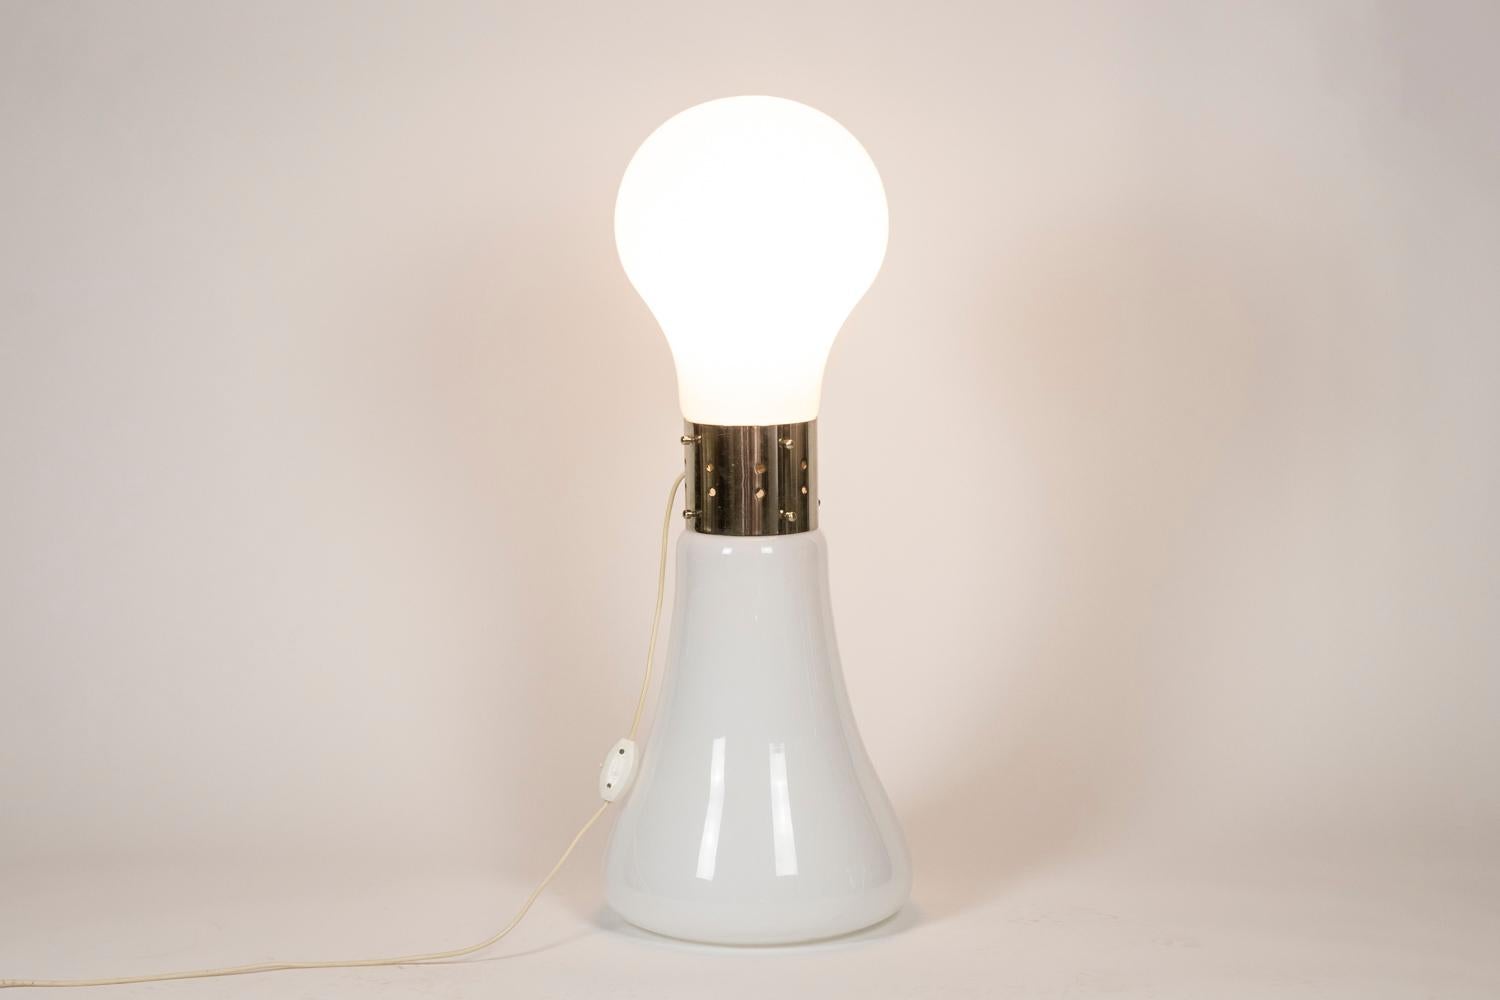 Carlo Nason, par.
Mazzega, edited by.

Murano opaline glass lamp, white color and two lights, with round shapes. Central part in chromed metal.

Italian work realized in the 1960s.

Works with two E-27 bulbs!